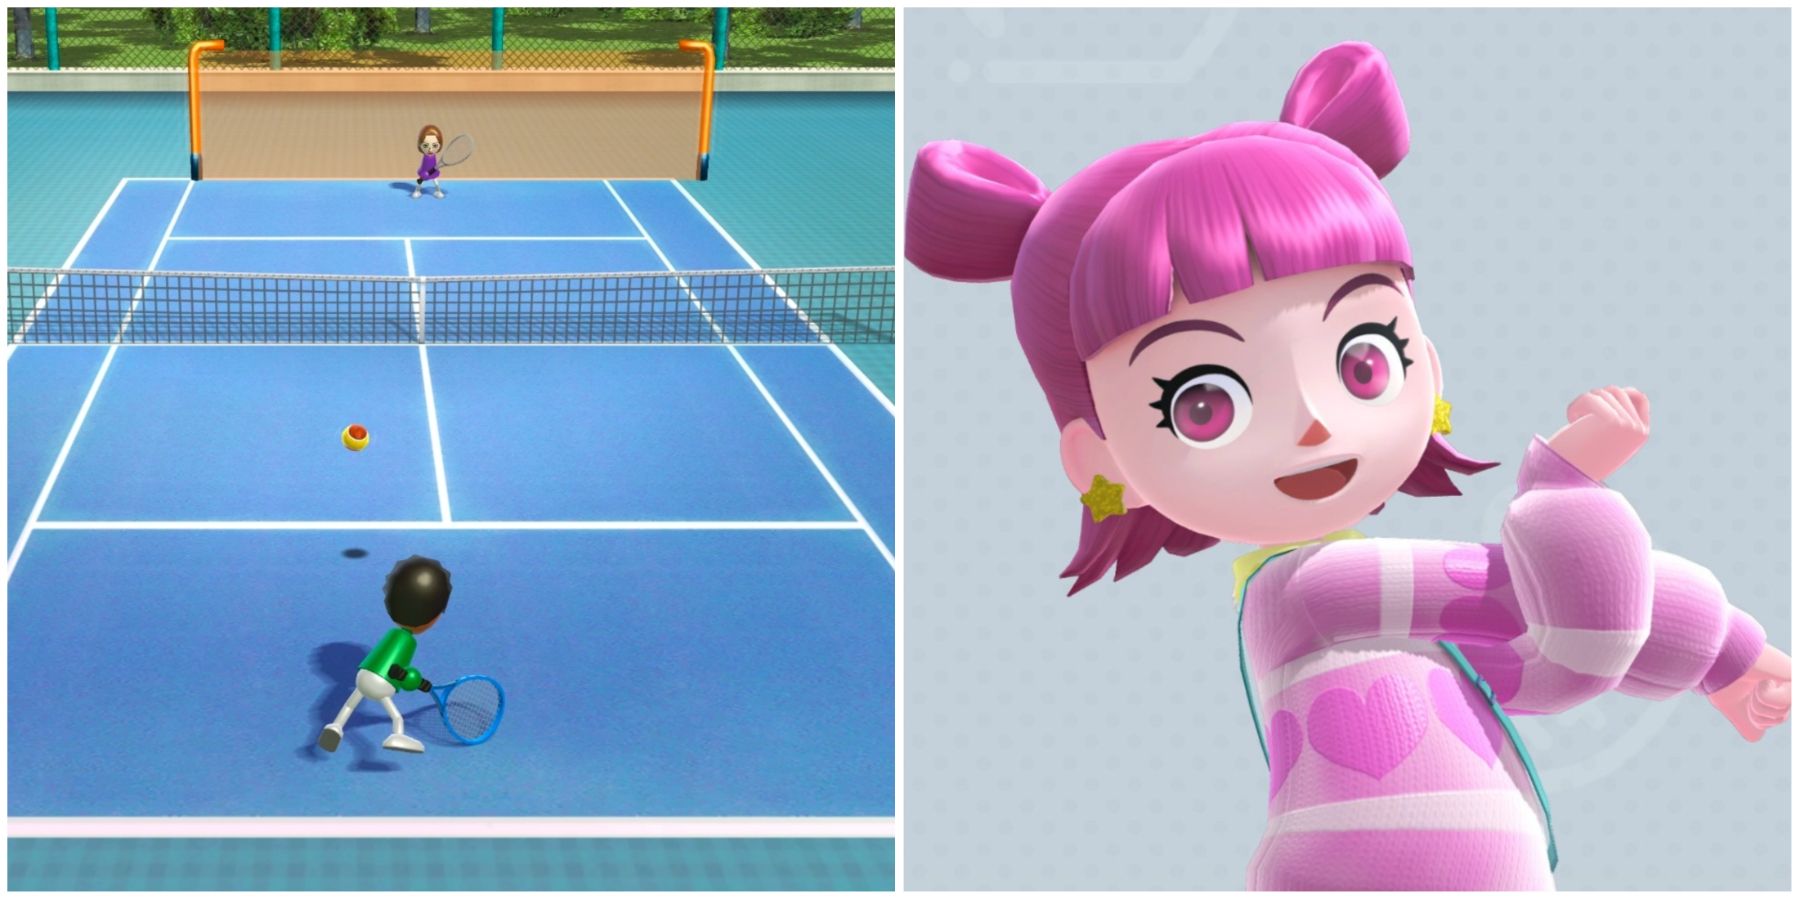 Featured image of Wii Sports Training mode versus Nintendo Switch Sportsmate